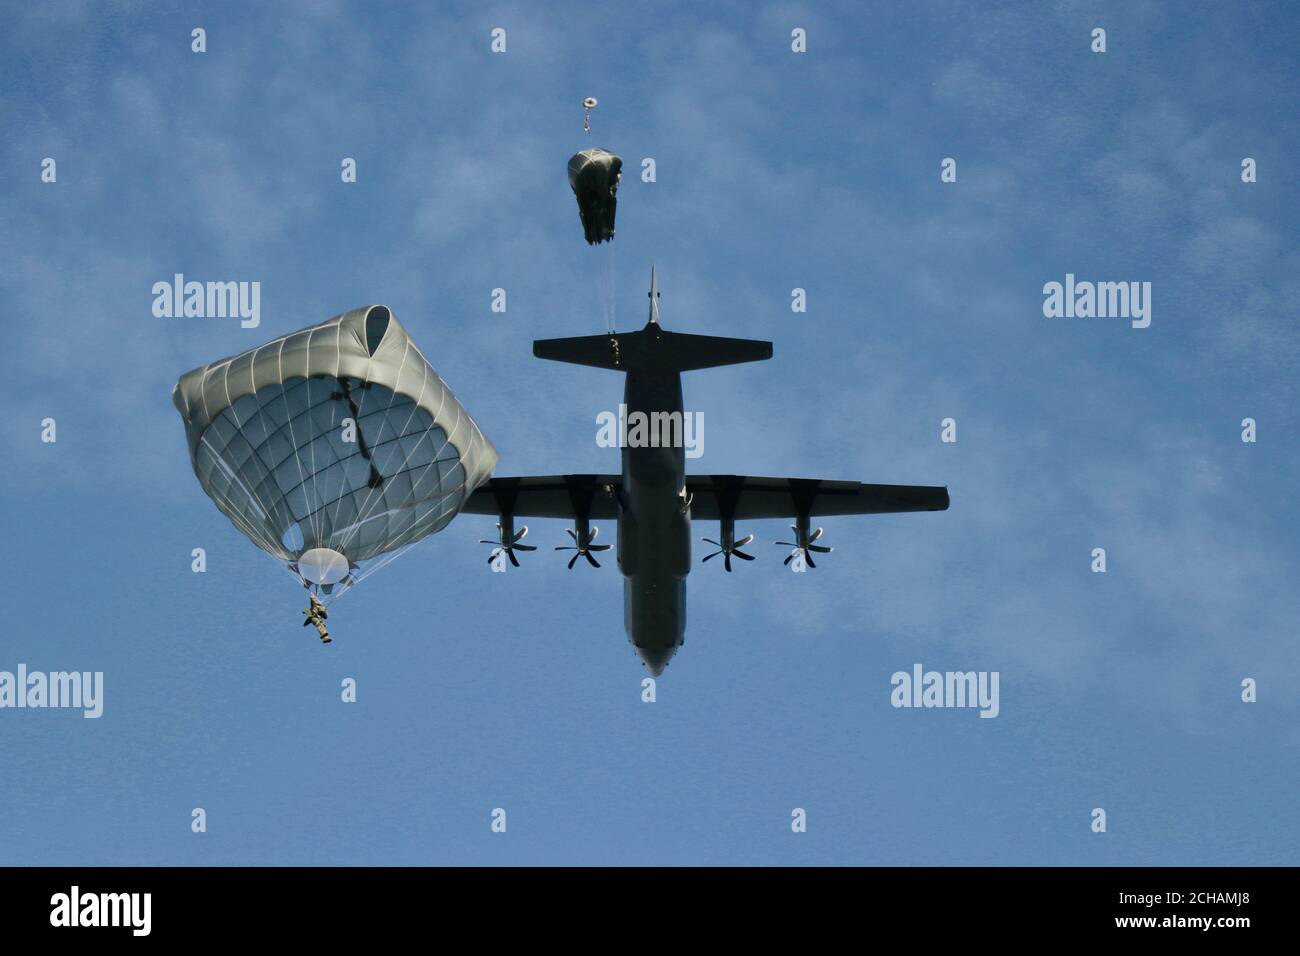 U.S. Army Reserve paratroopers from the 416th Civil Affairs Battalion (Airborne) conduct airborne operations from a C-130 aircraft over Edwards Air Force Base, Calif., Feb. 22, 2020. Soldiers assigned to airborne units must complete a parachute jump every three months to retain jump certification and proficiency. (U.S. Army Reserve photo by Master Sgt. Alec Appleton) Stock Photo